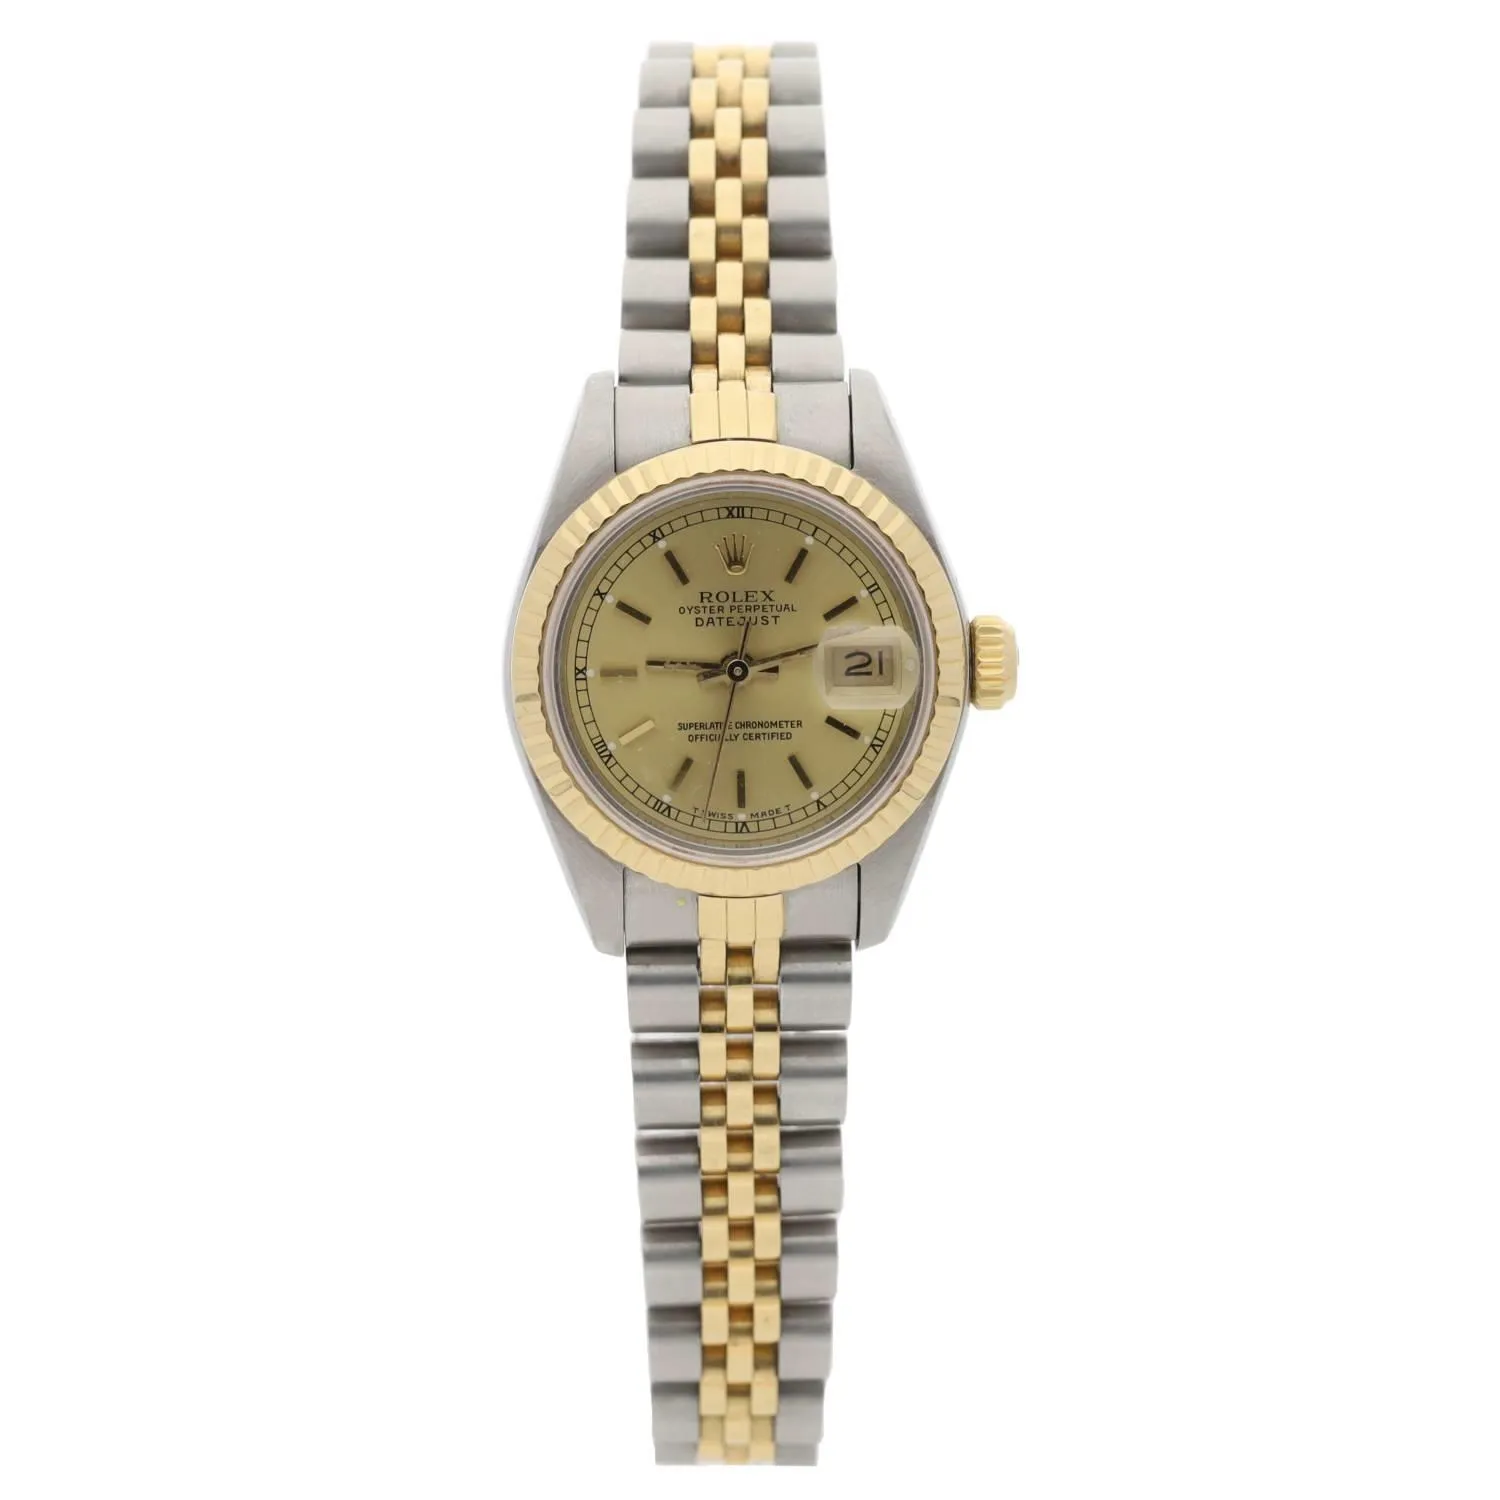 Rolex Lady-Datejust 69173 26mm Gold and stainless steel Champagne